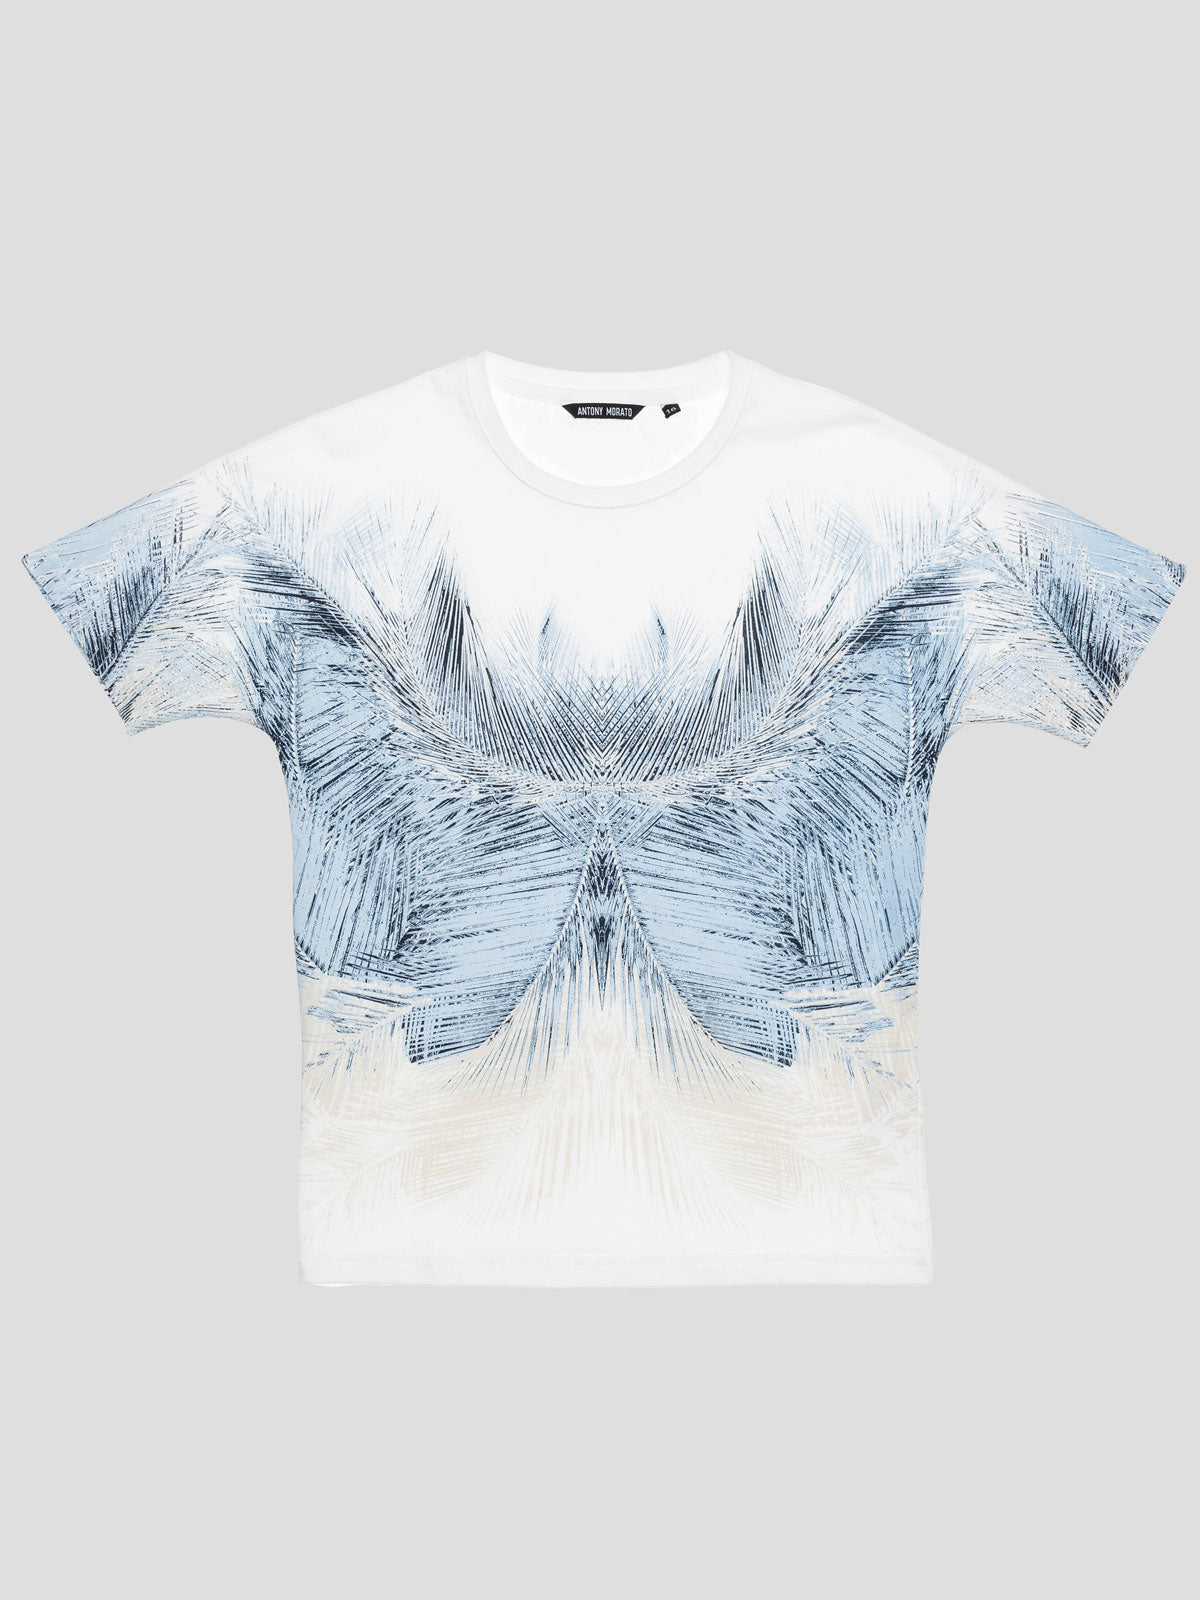 Antony Morato cotton t-shirt with water based print